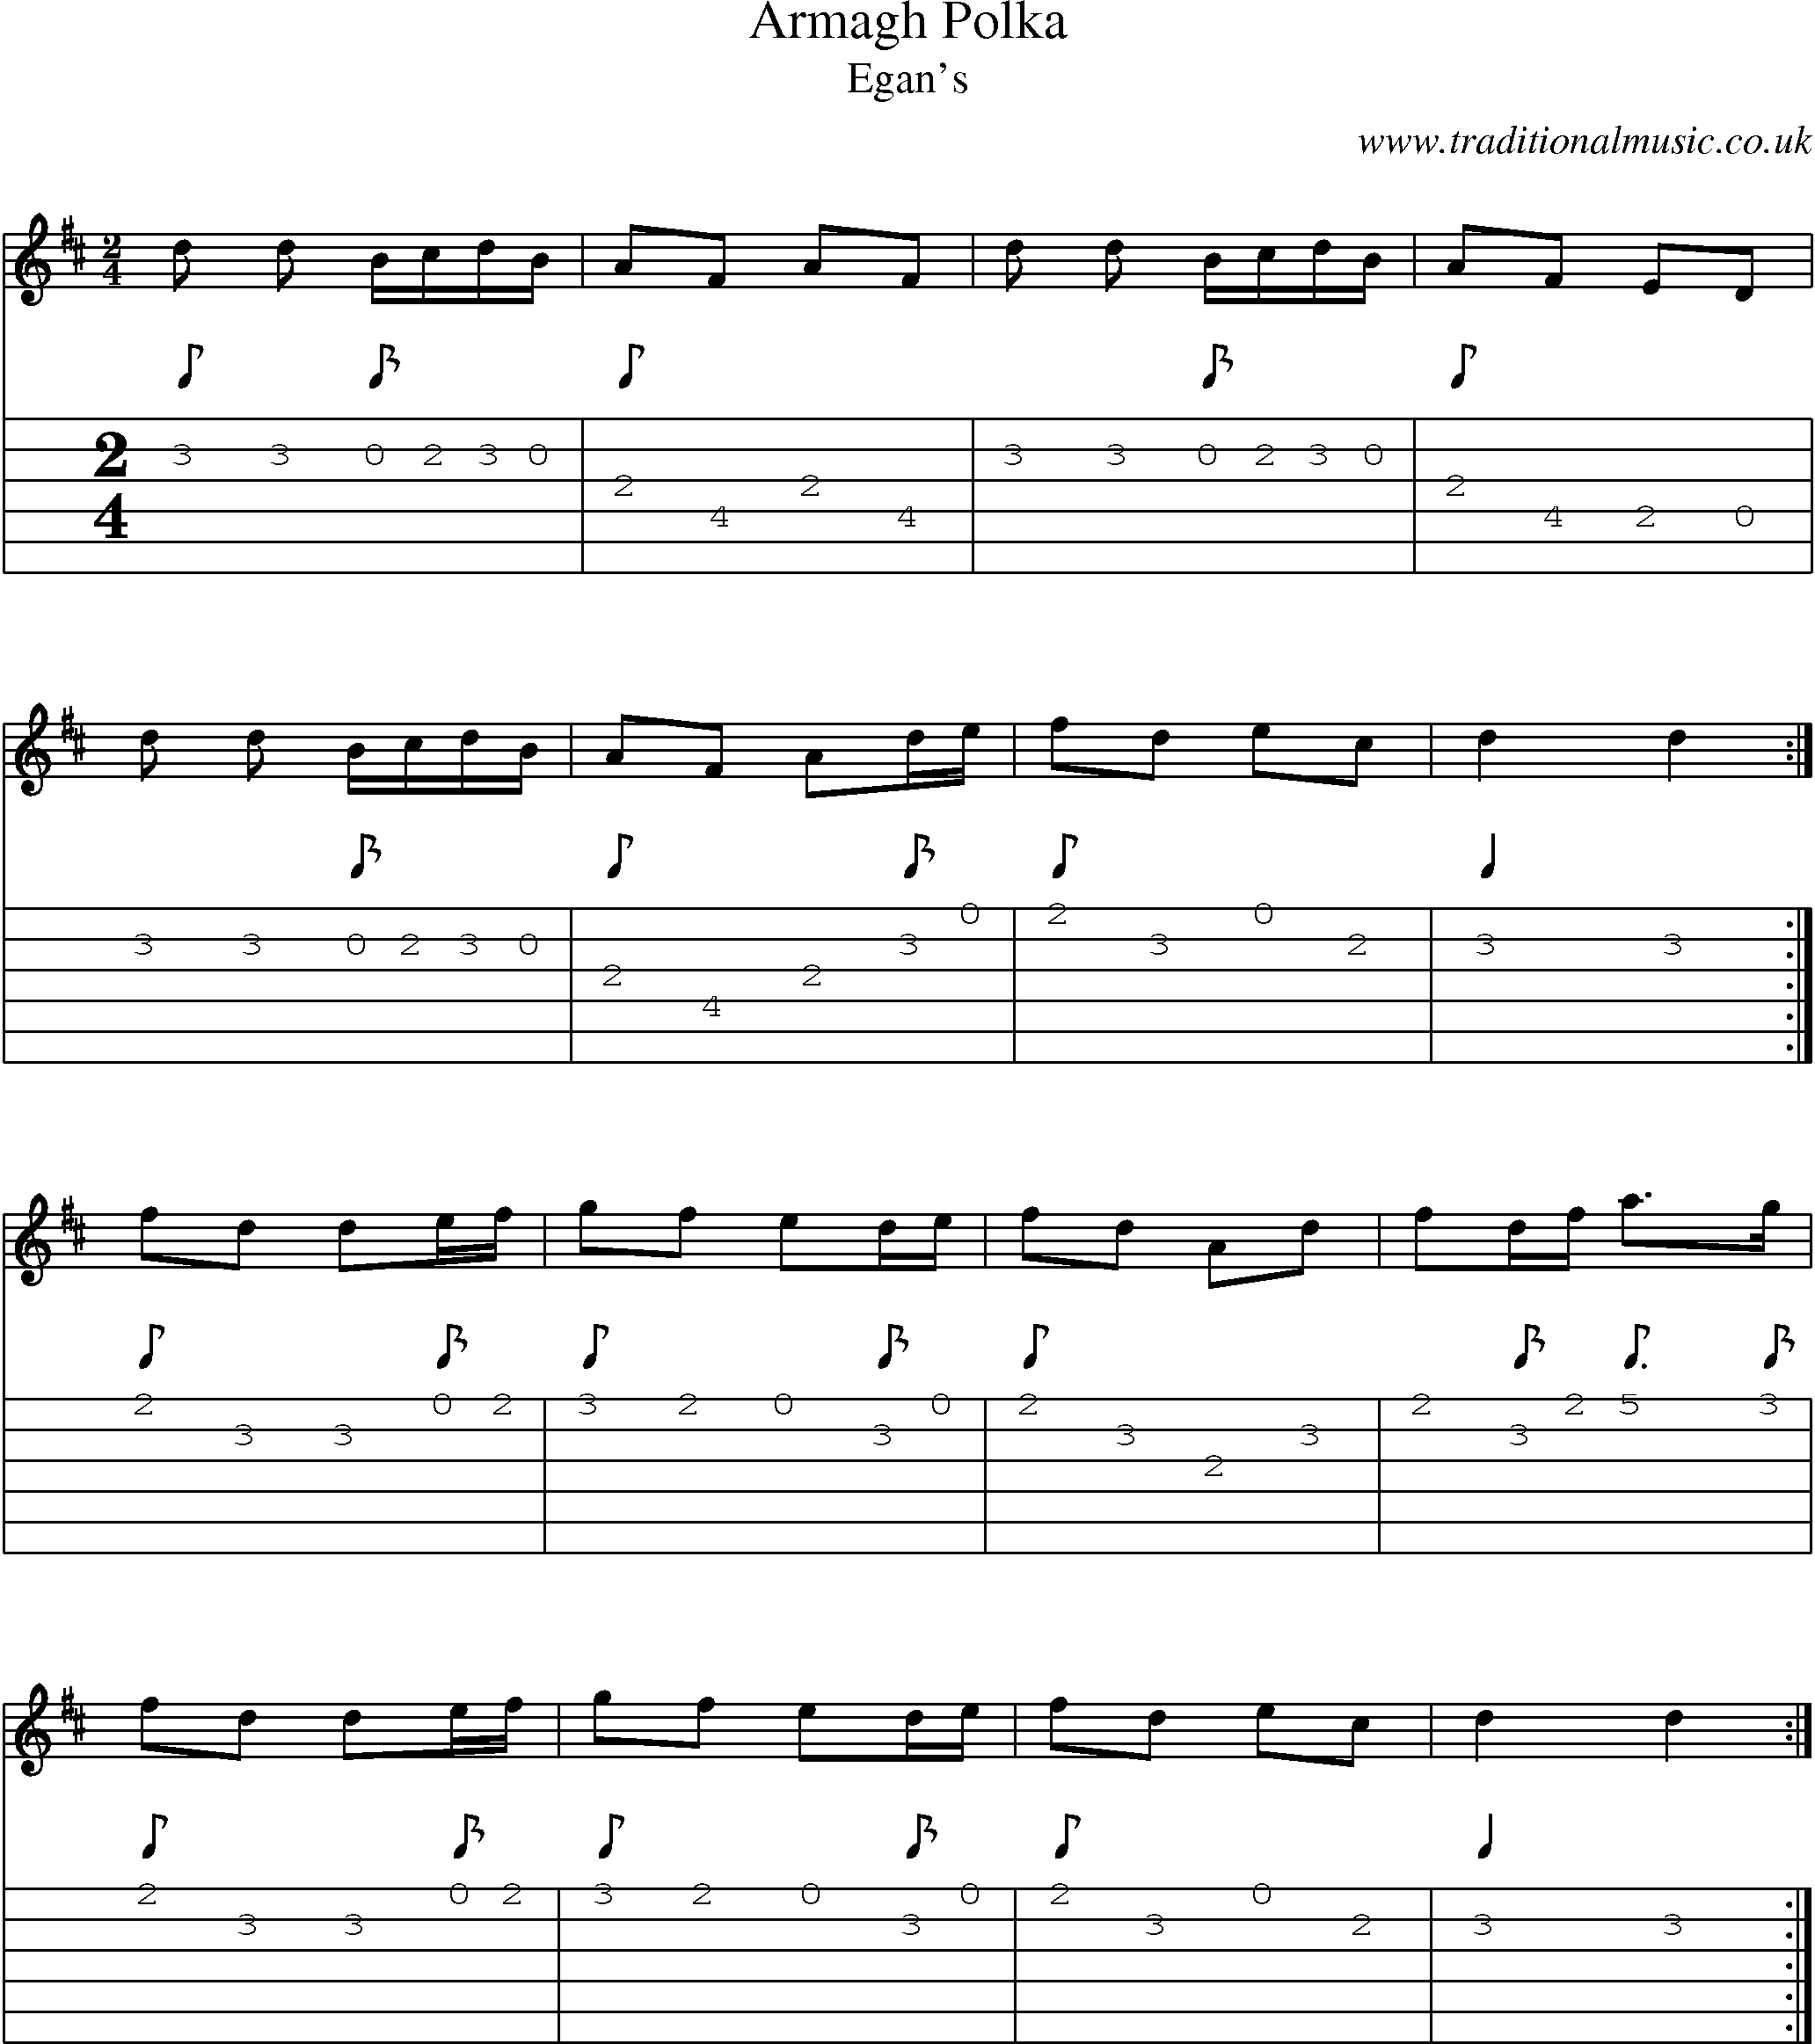 Music Score and Guitar Tabs for Armagolka